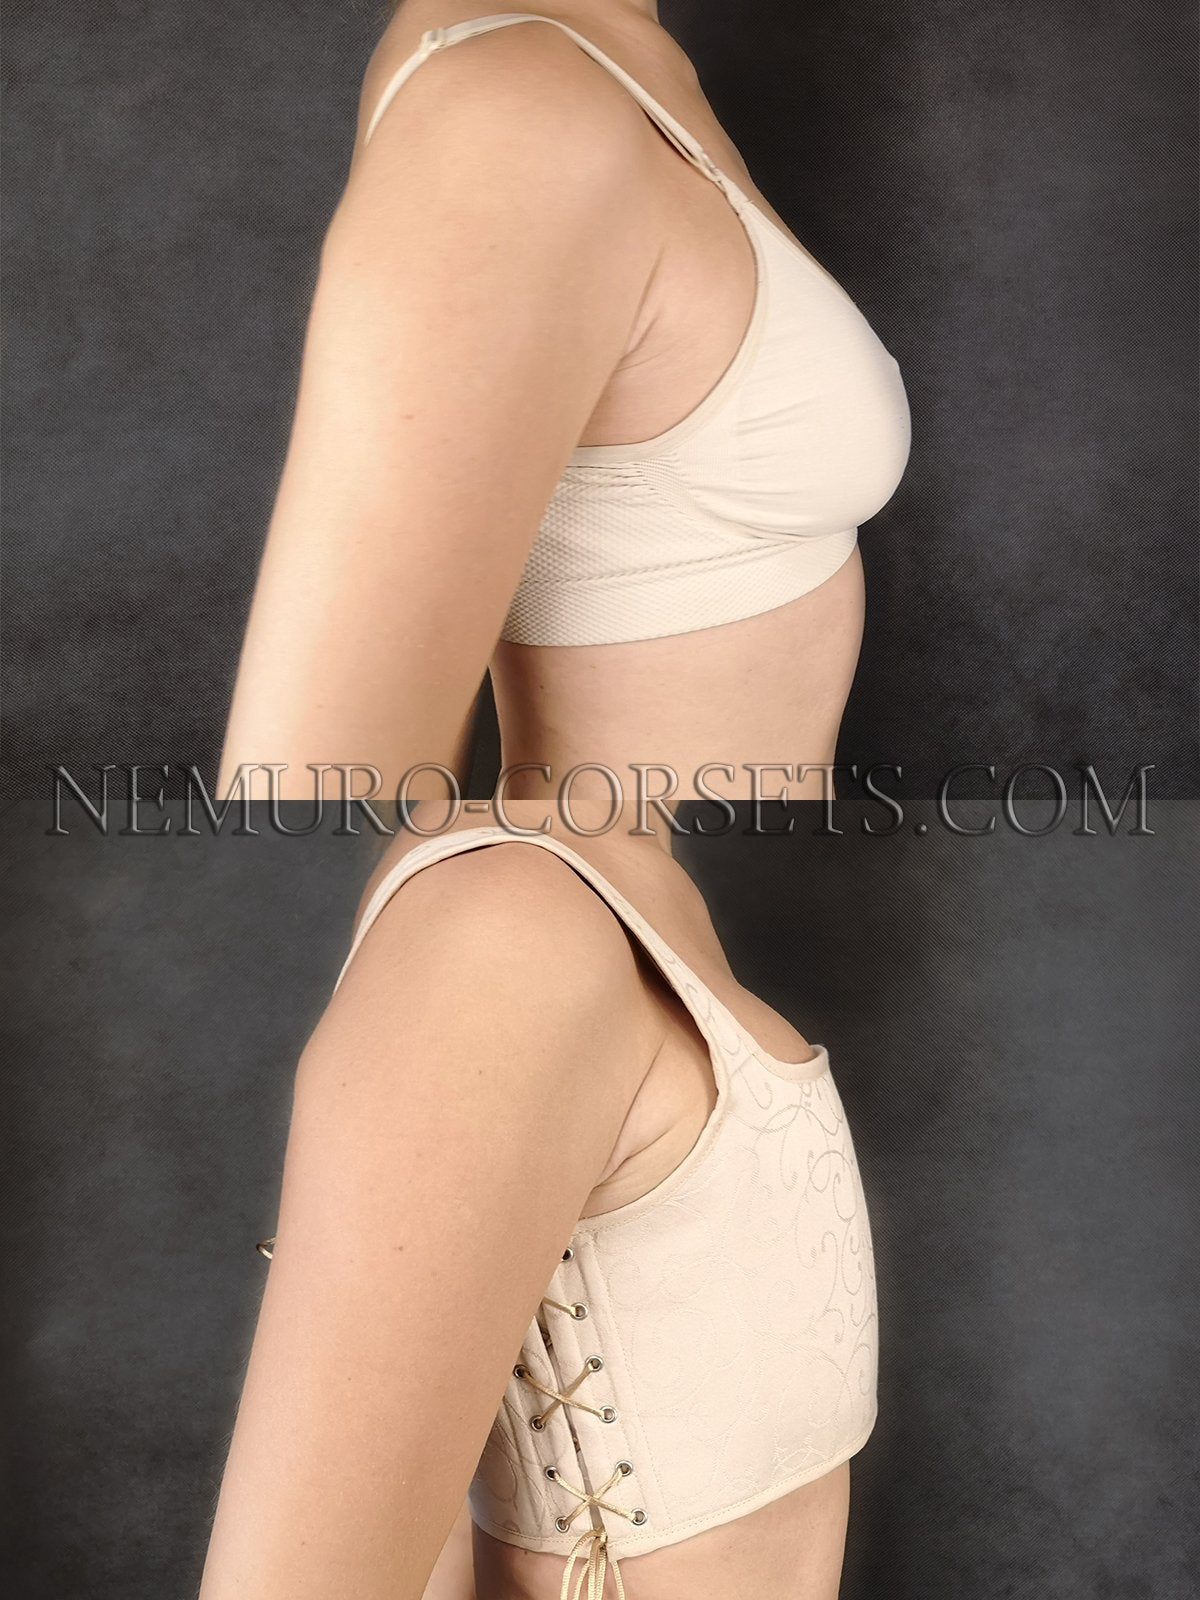 flat chest binder bra - Buy flat chest binder bra at Best Price in